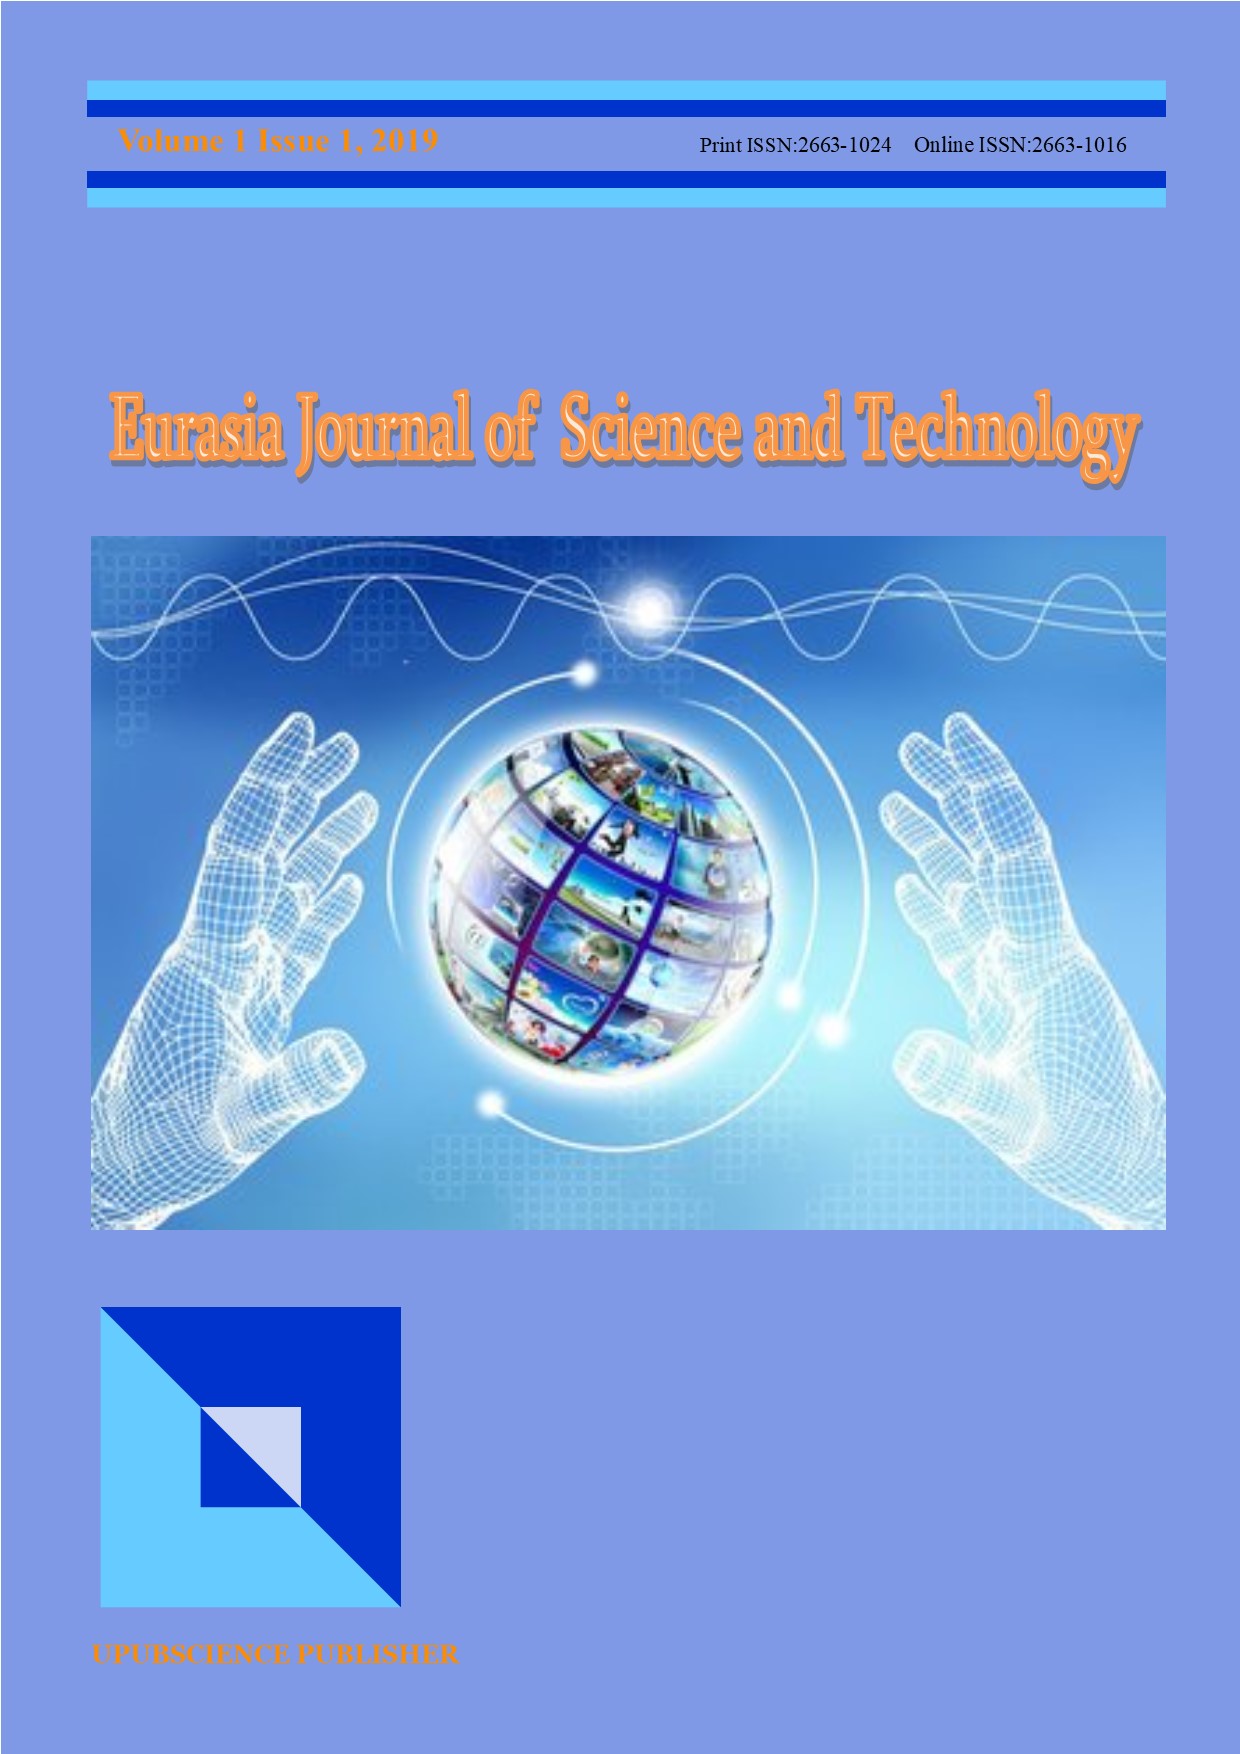 Eurasia Journal of Science and Technology